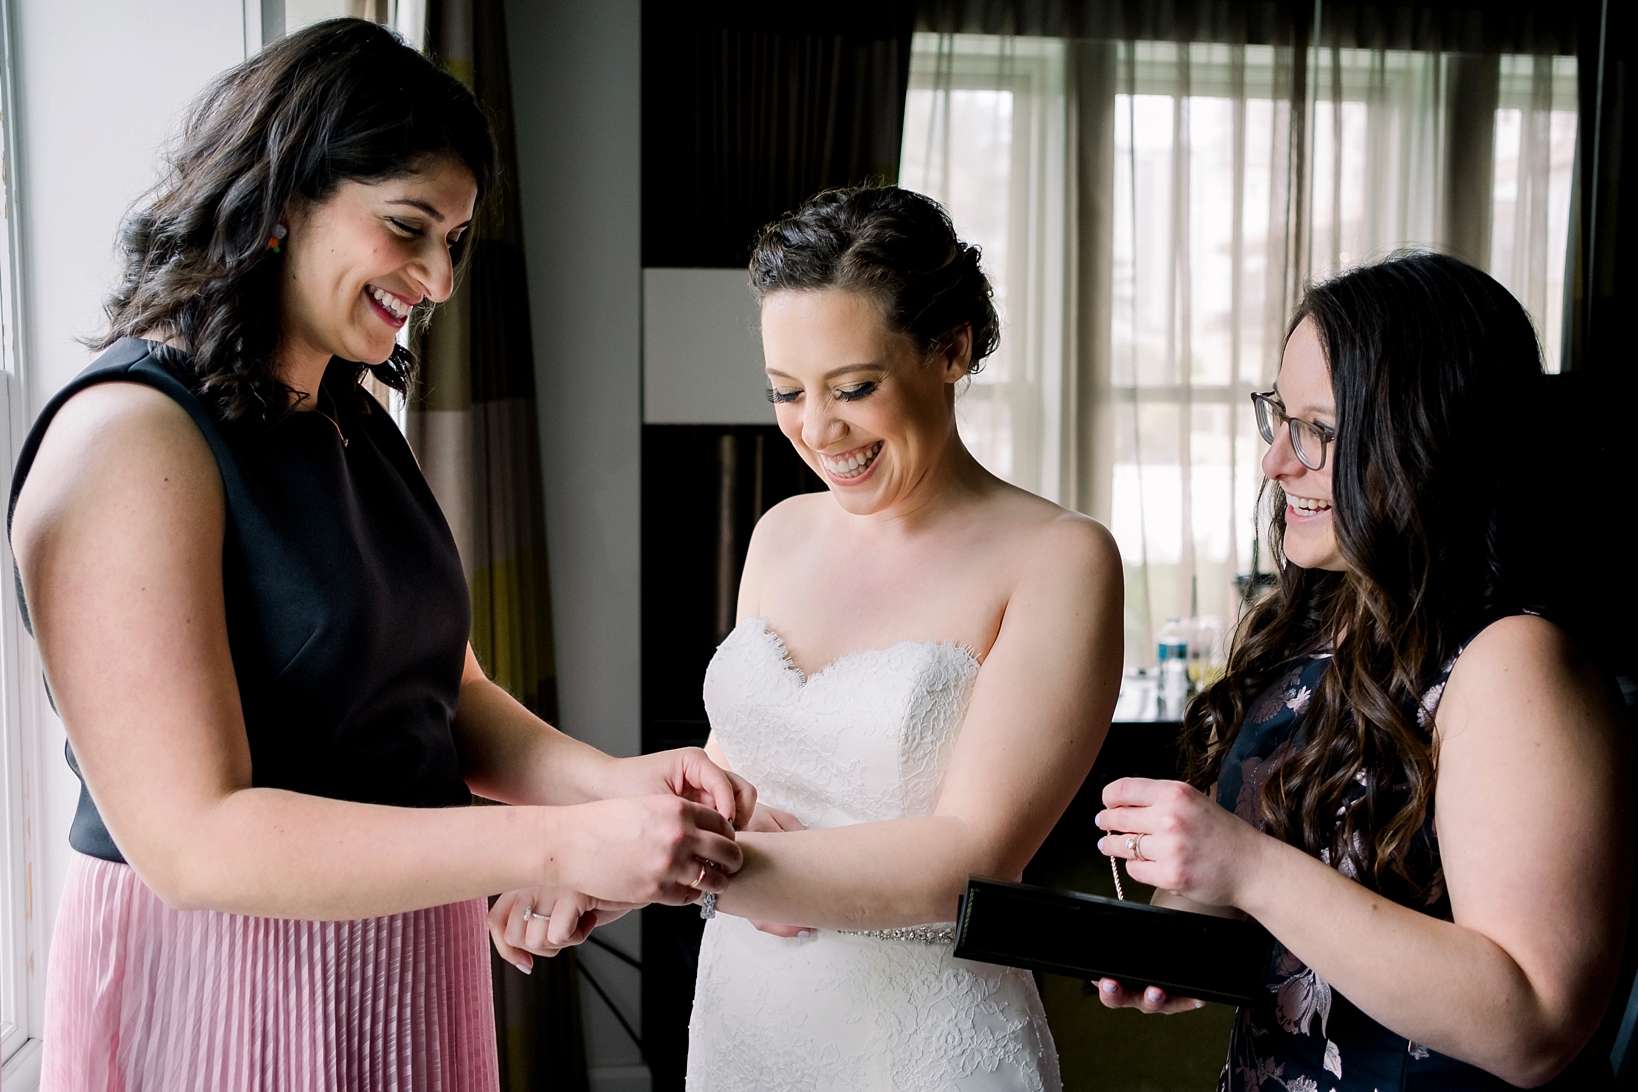 The Bride smiles as her friends help her with her wedding accessories by Sarah & Ben Photography